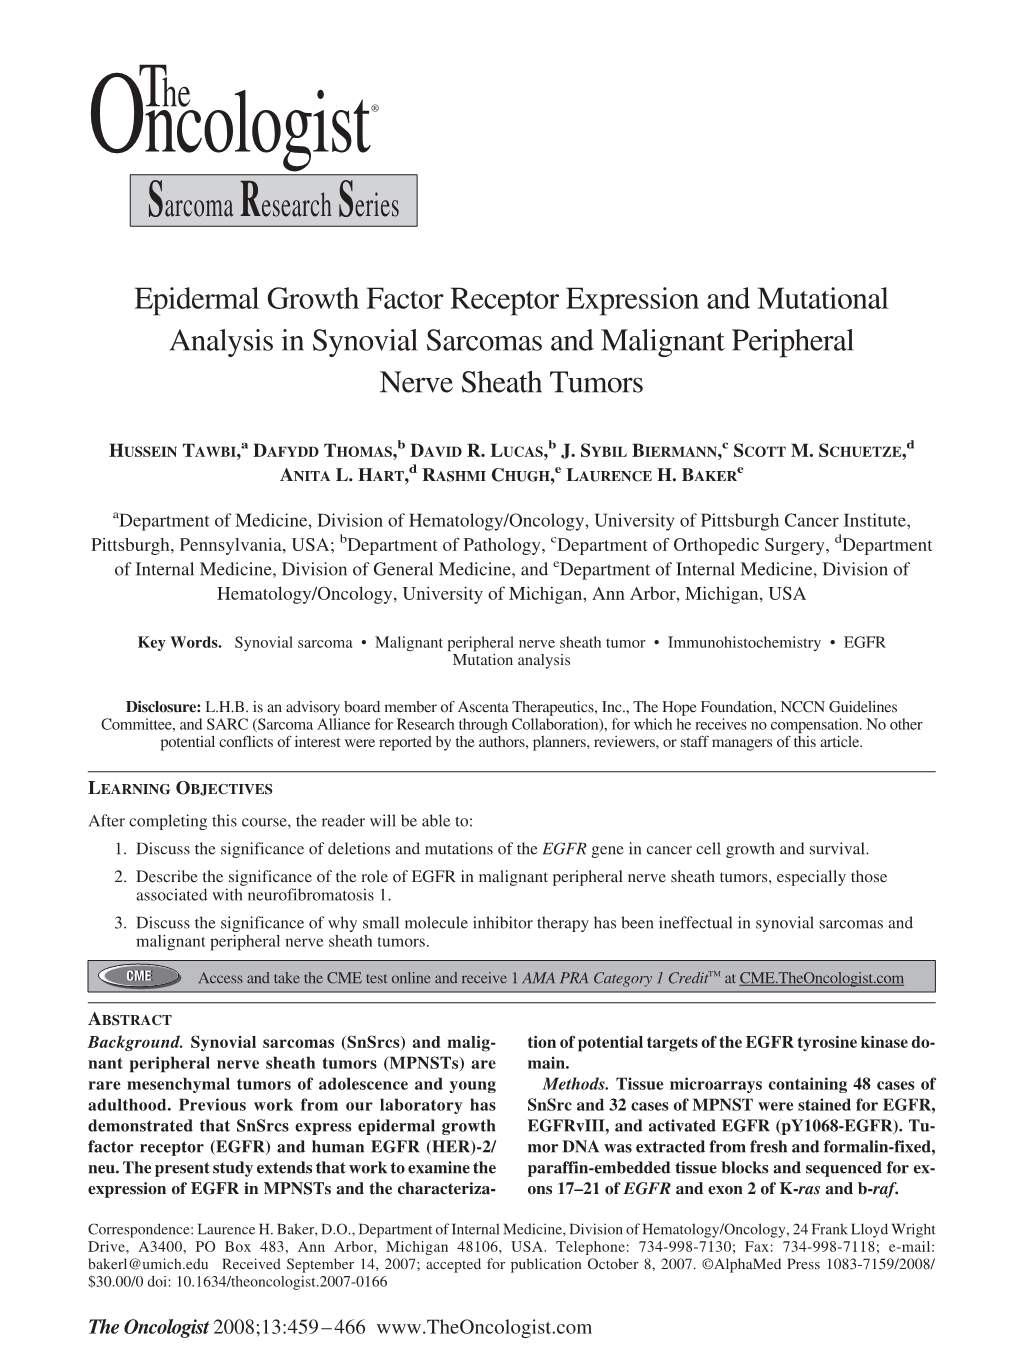 Epidermal Growth Factor Receptor Expression and Mutational Analysis in Synovial Sarcomas and Malignant Peripheral Nerve Sheath Tumors